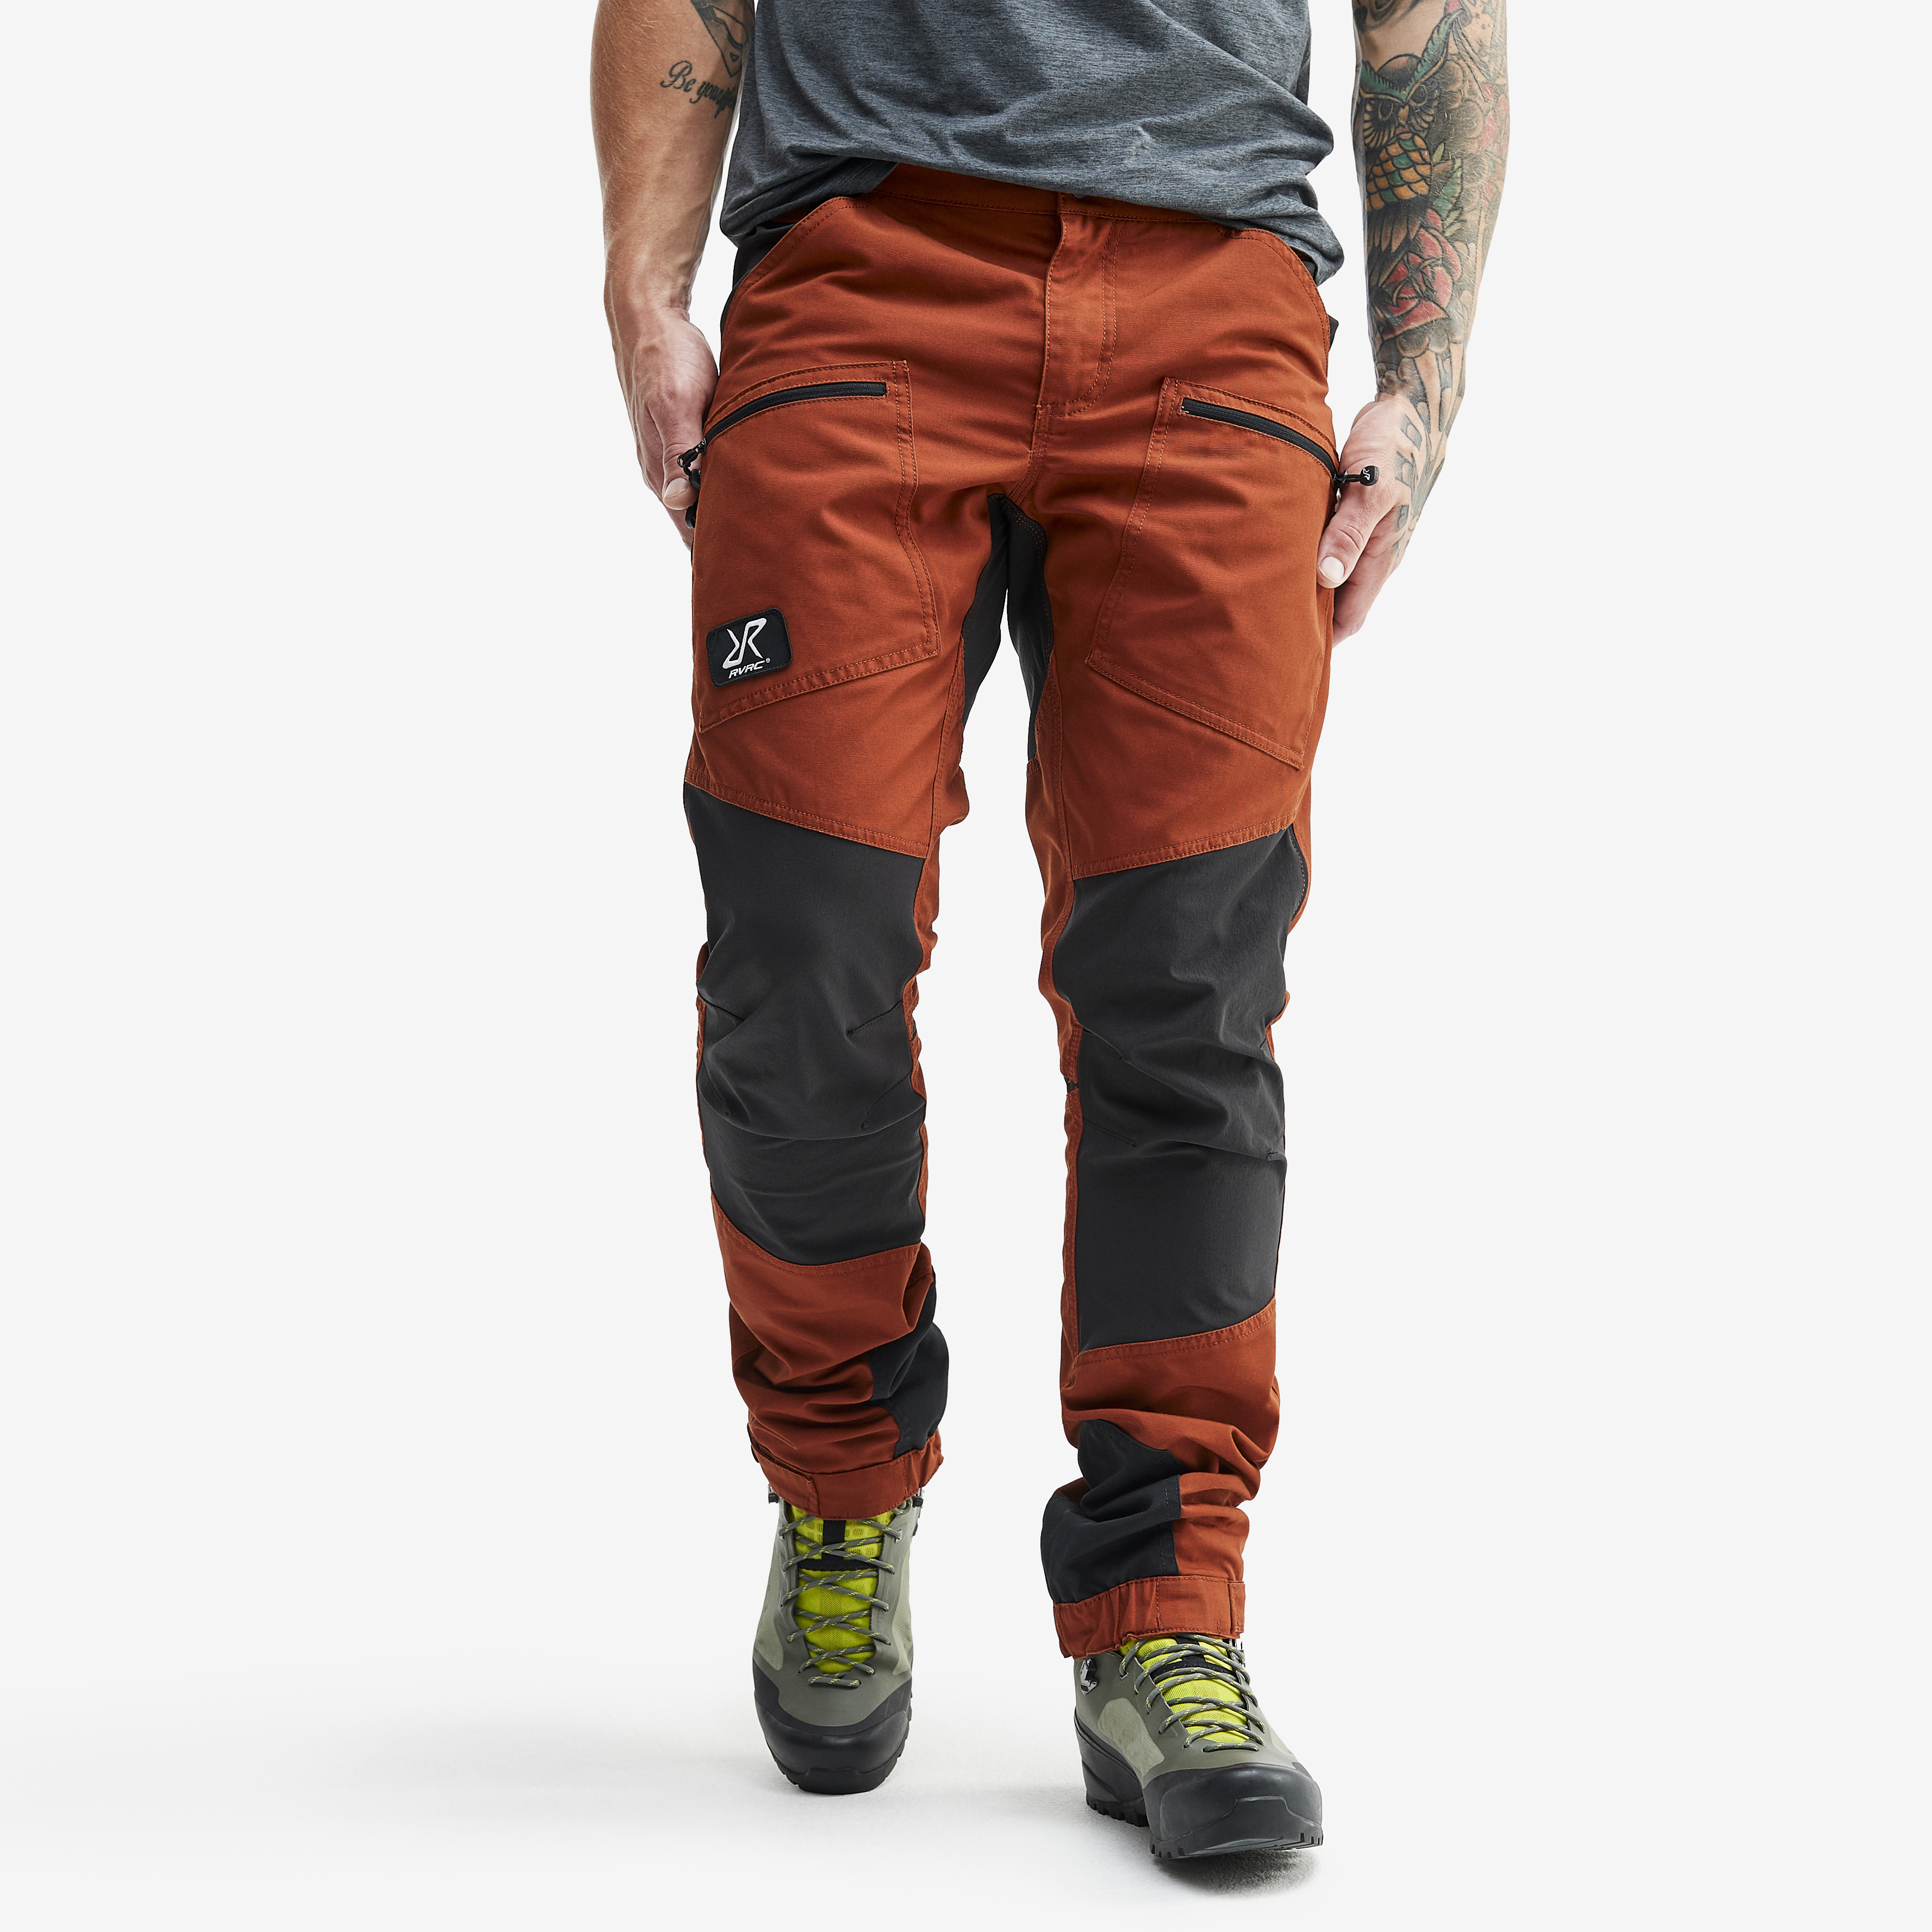 Nordwand Pro hiking trousers for men in orange